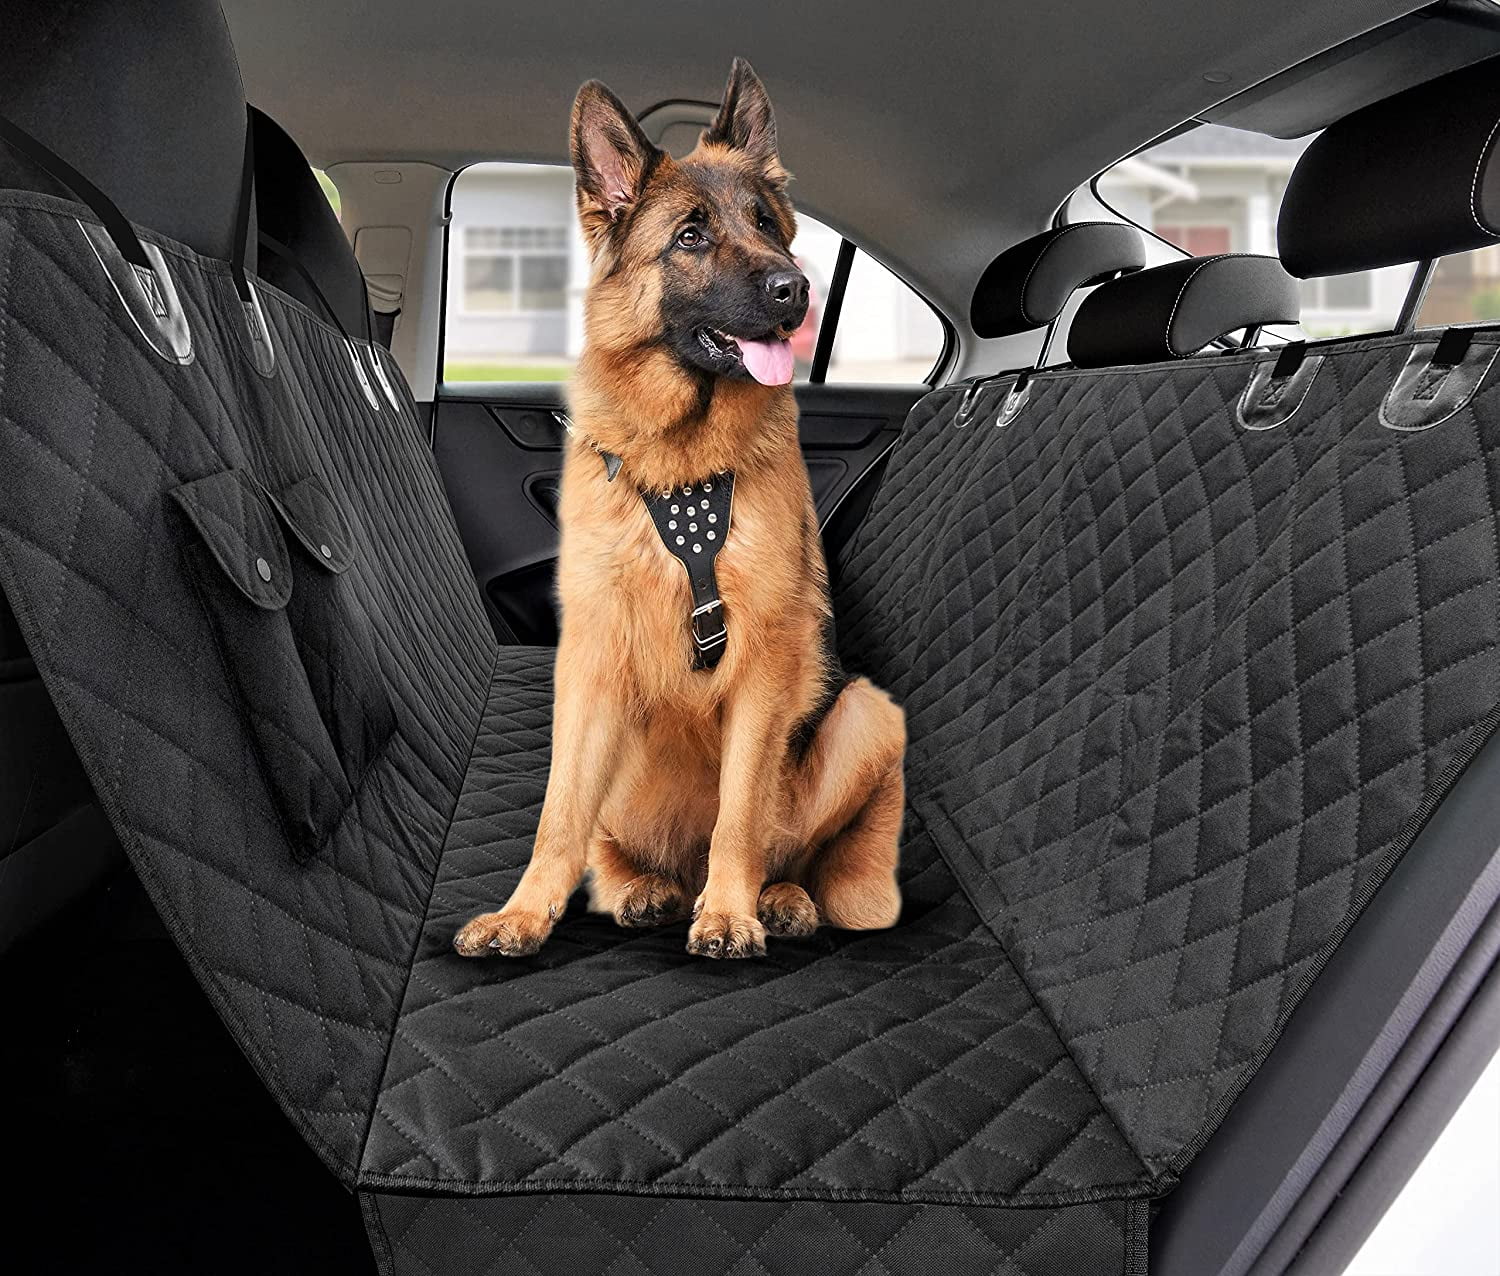  PETSFIT Back Seat Extender for Dogs, Dog Car Seat Extender  with Storage, Collapsible Large Dog Car Seat for Dogs Up to 90 LBS (Black)  : Pet Supplies